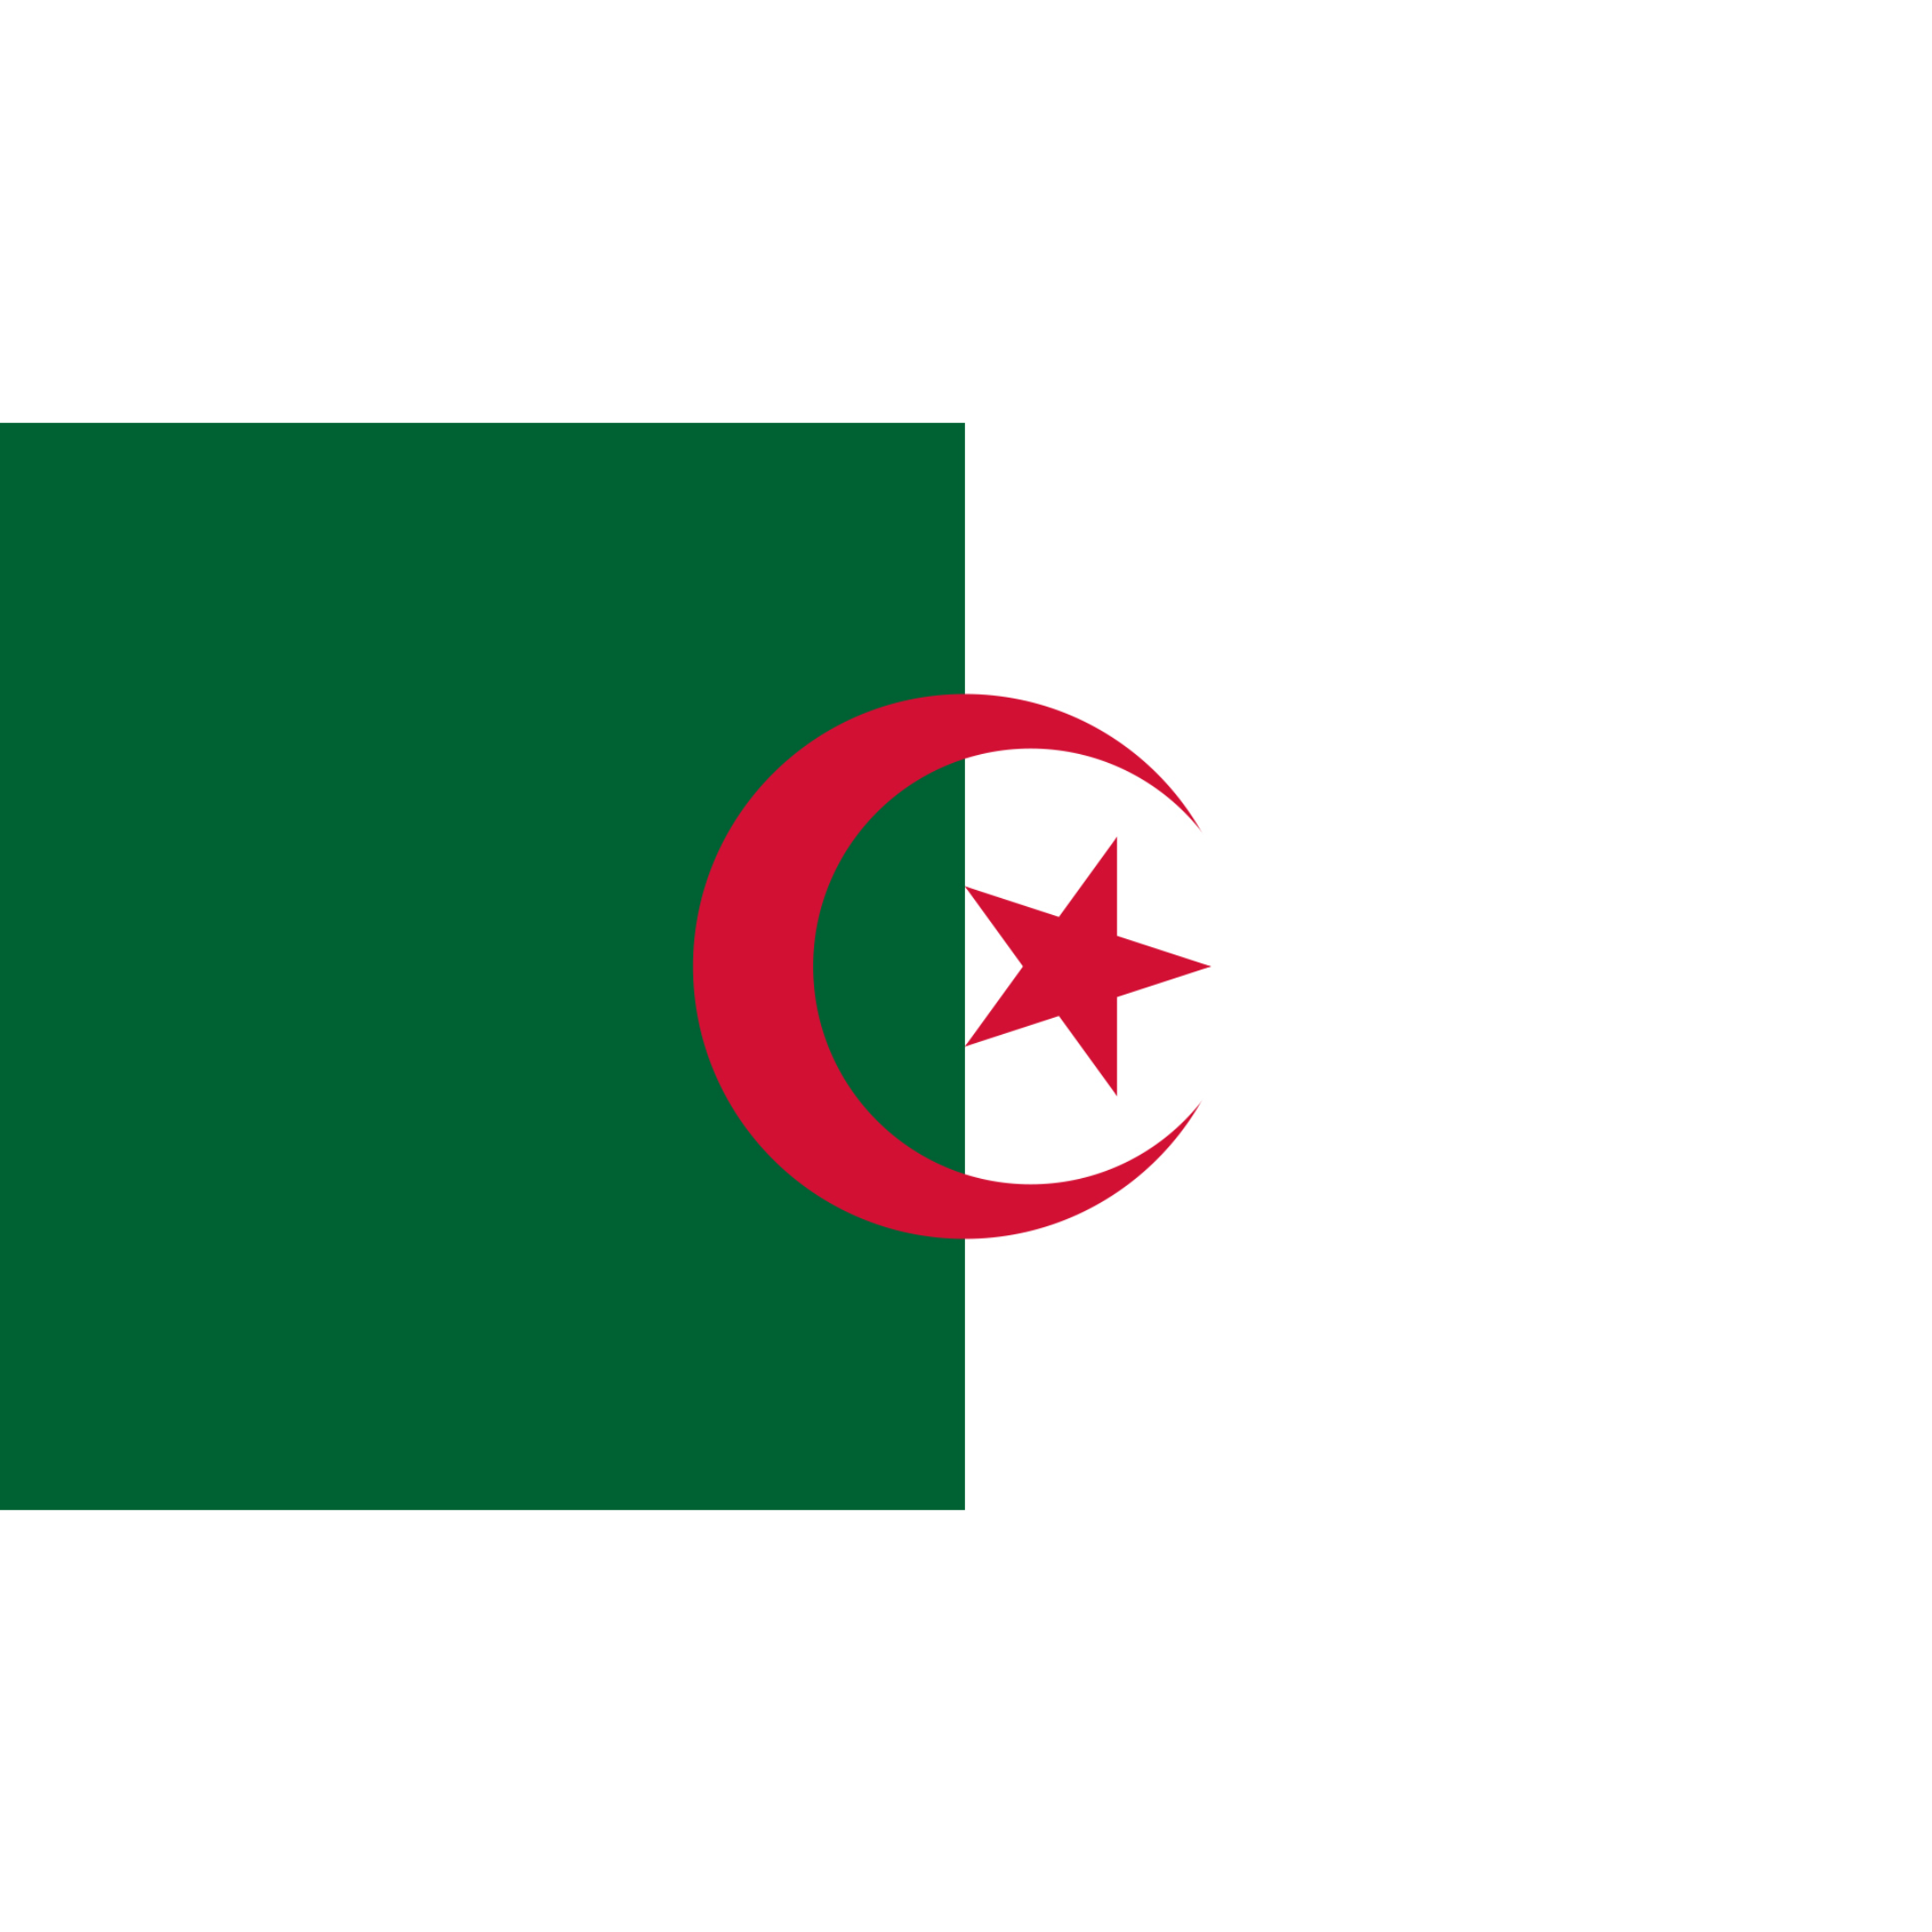 The Algerian flag is made up of two vertical halves in green and white, with a red star and crescent in the centre.